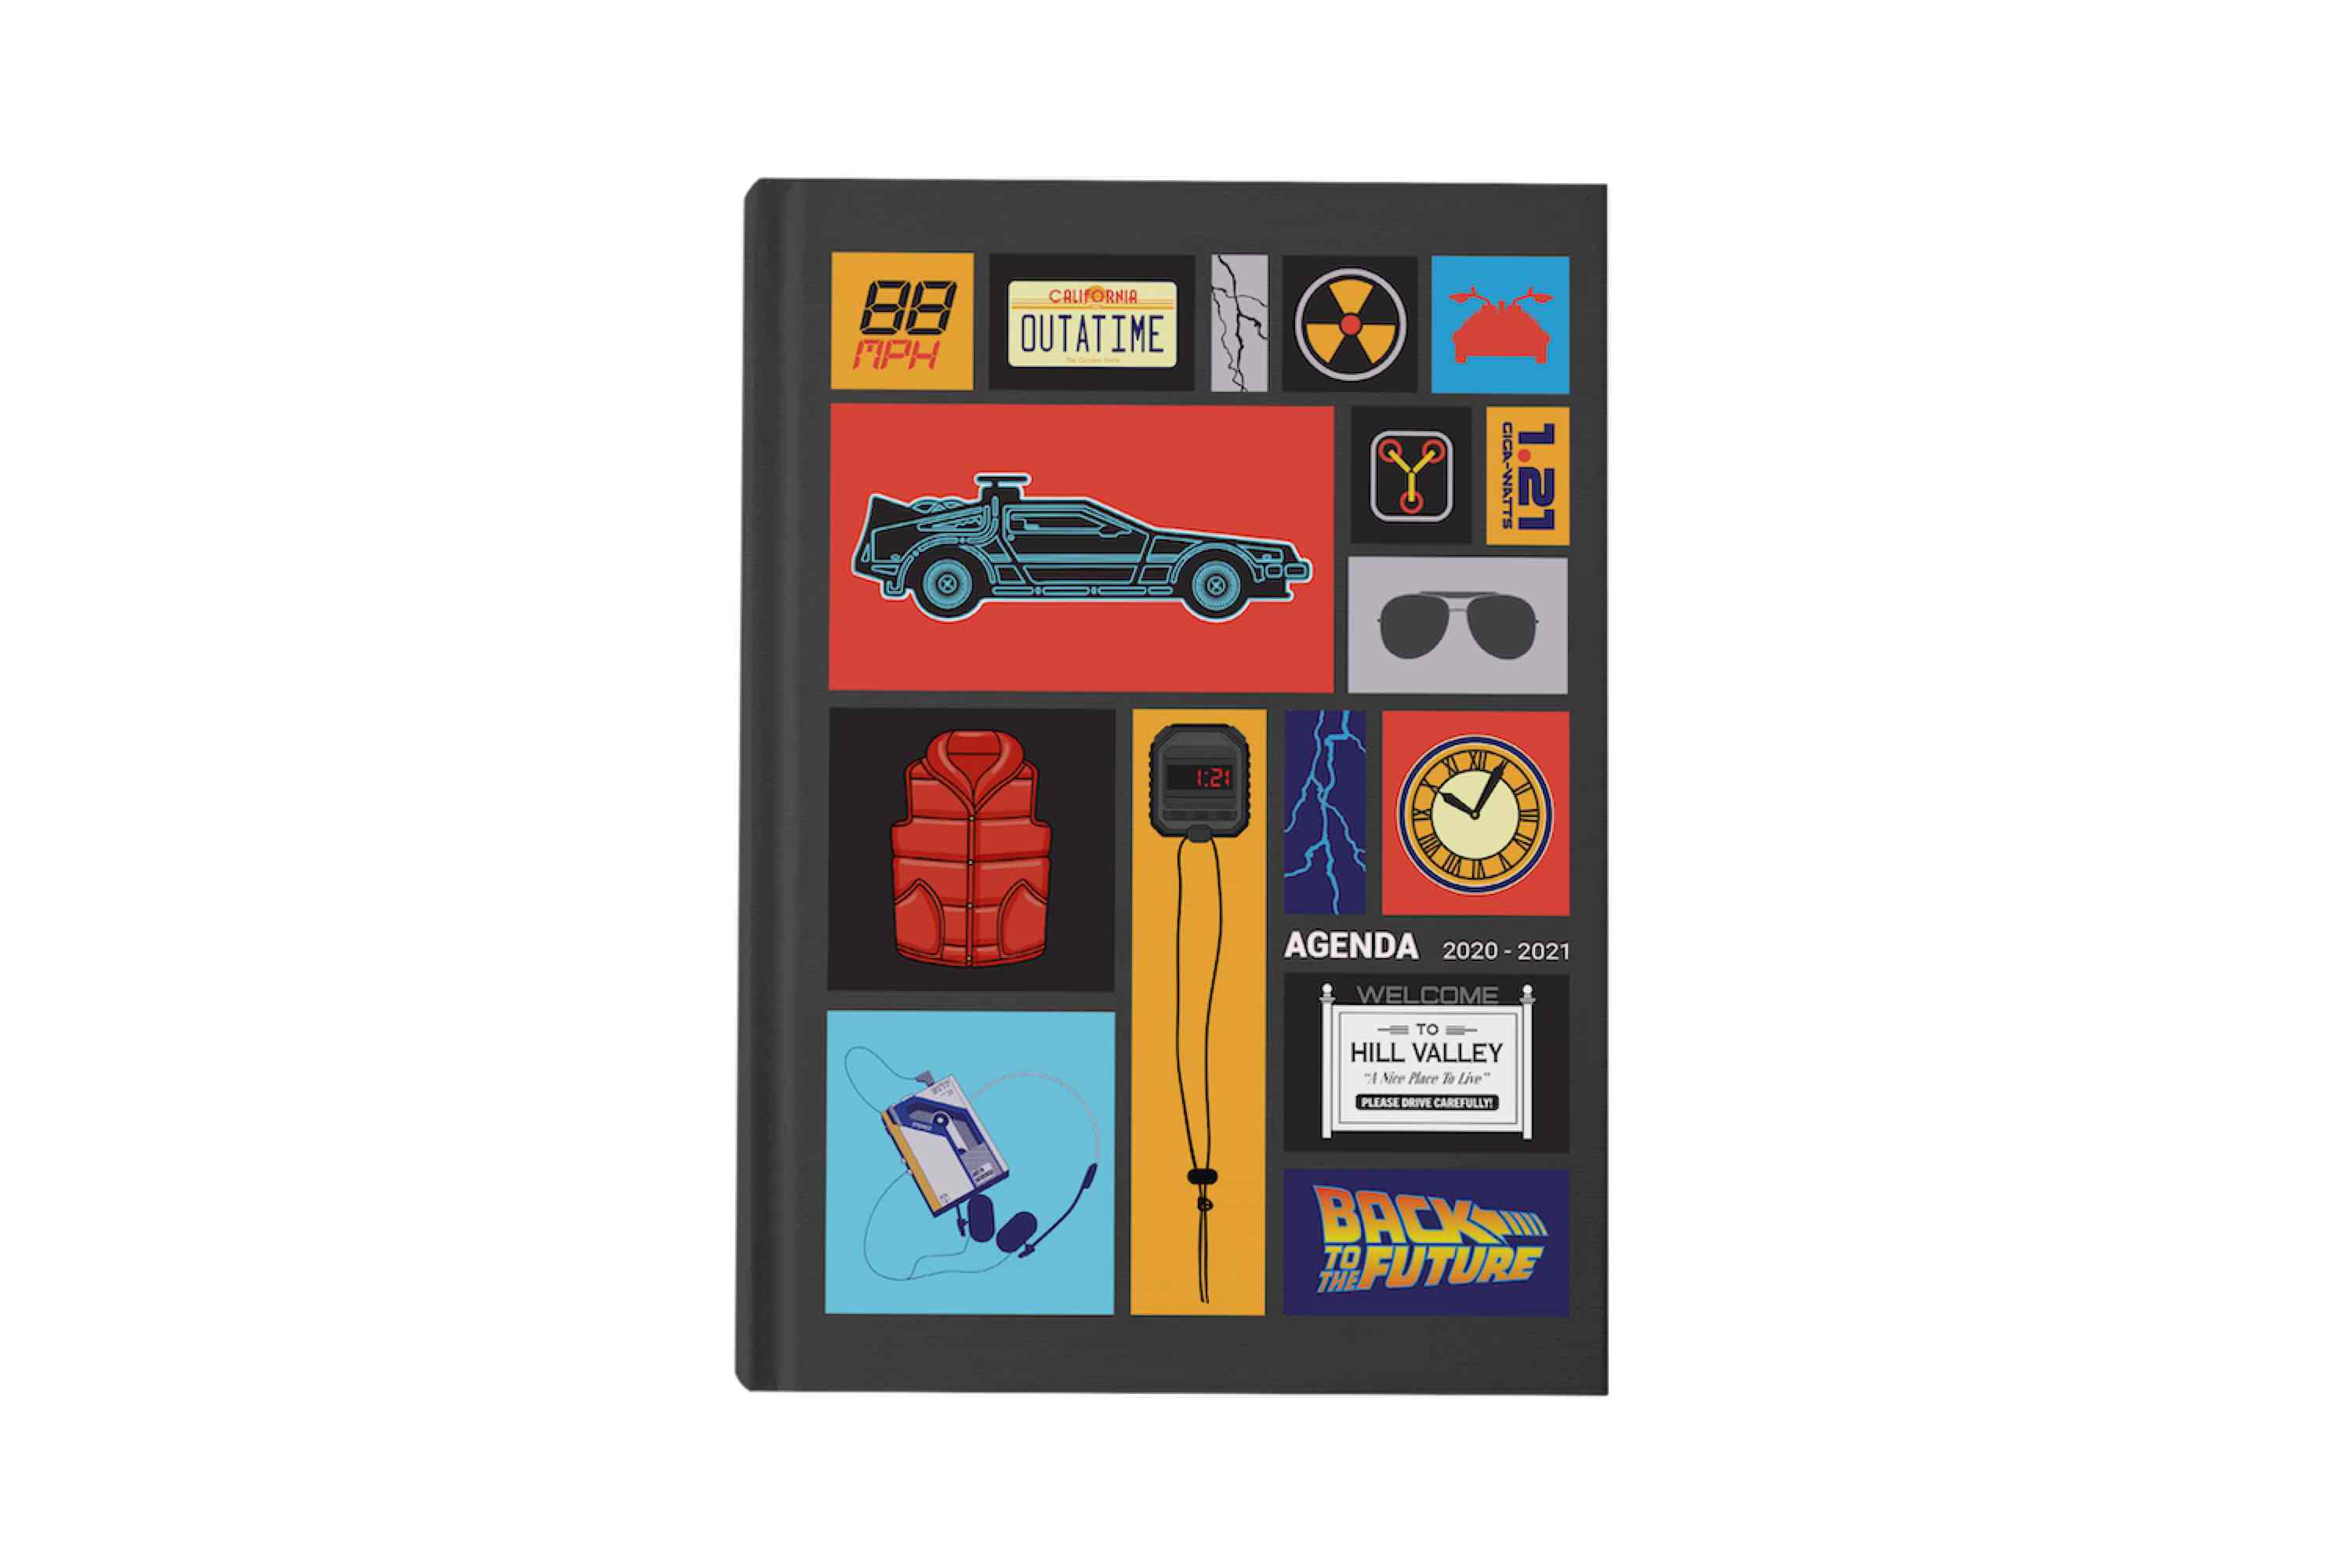 AGENDA BACK TO THE FUTURE IMAGES